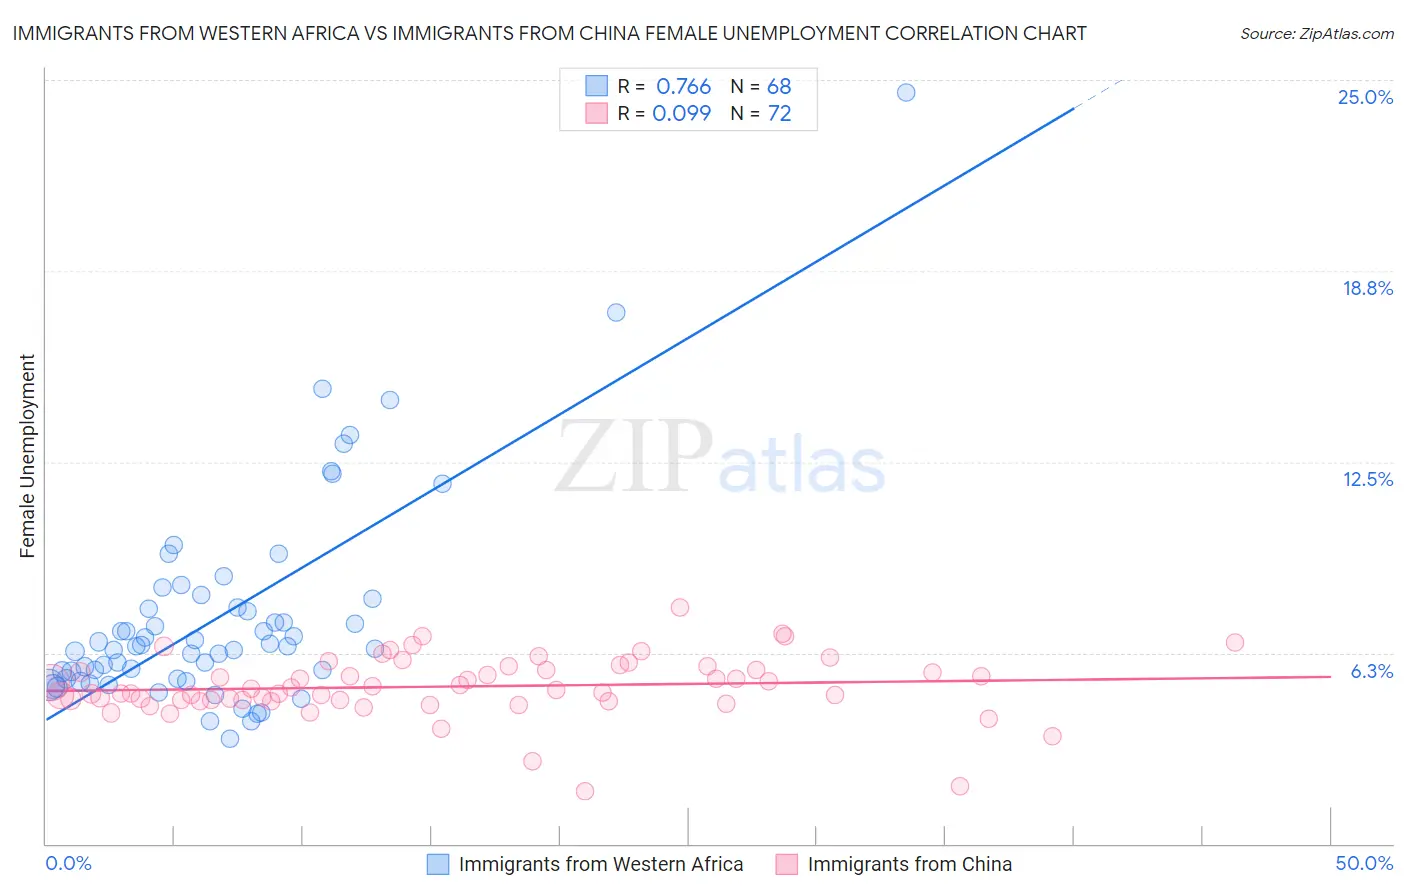 Immigrants from Western Africa vs Immigrants from China Female Unemployment